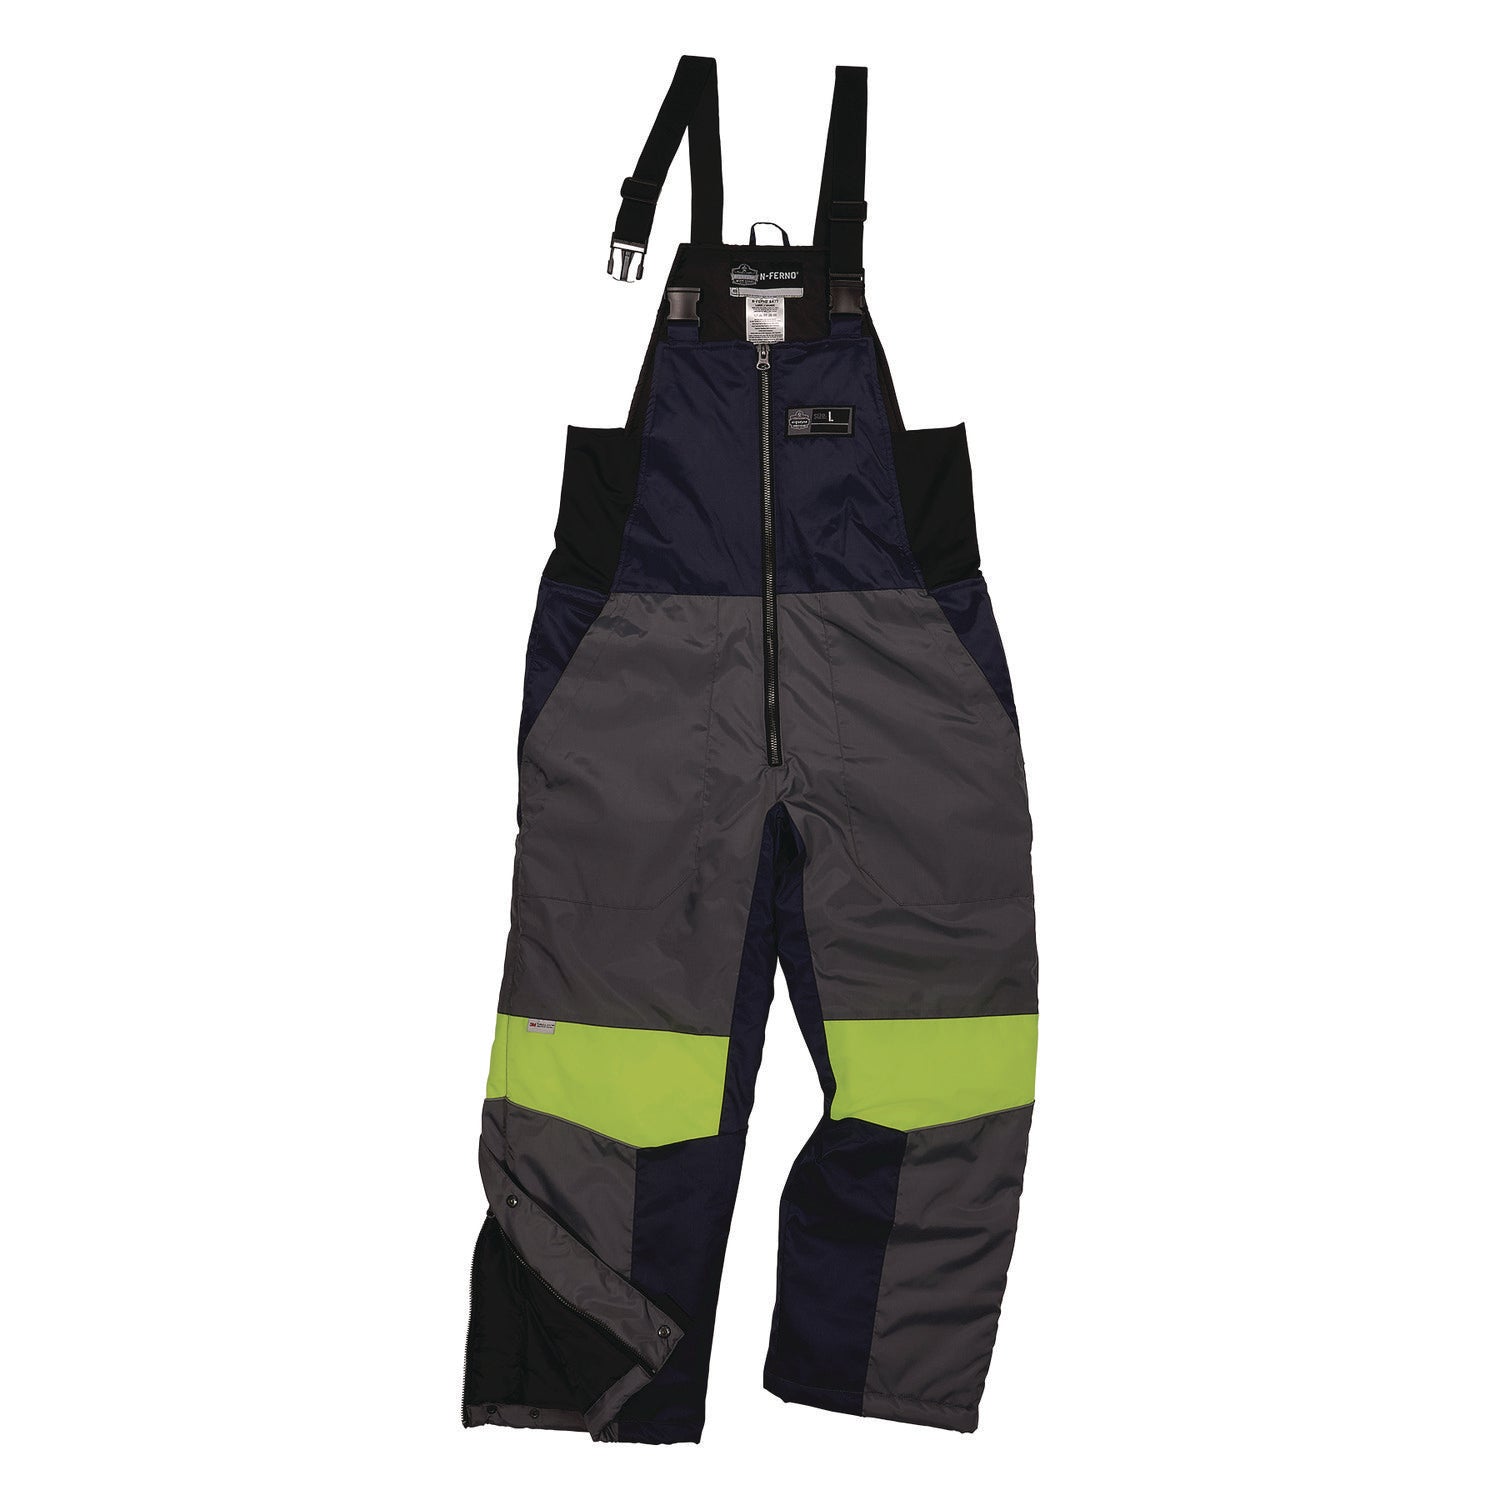 n-ferno-6477-insulated-cooler-bib-overall-large-navy-ships-in-1-3-business-days_ego41264 - 1